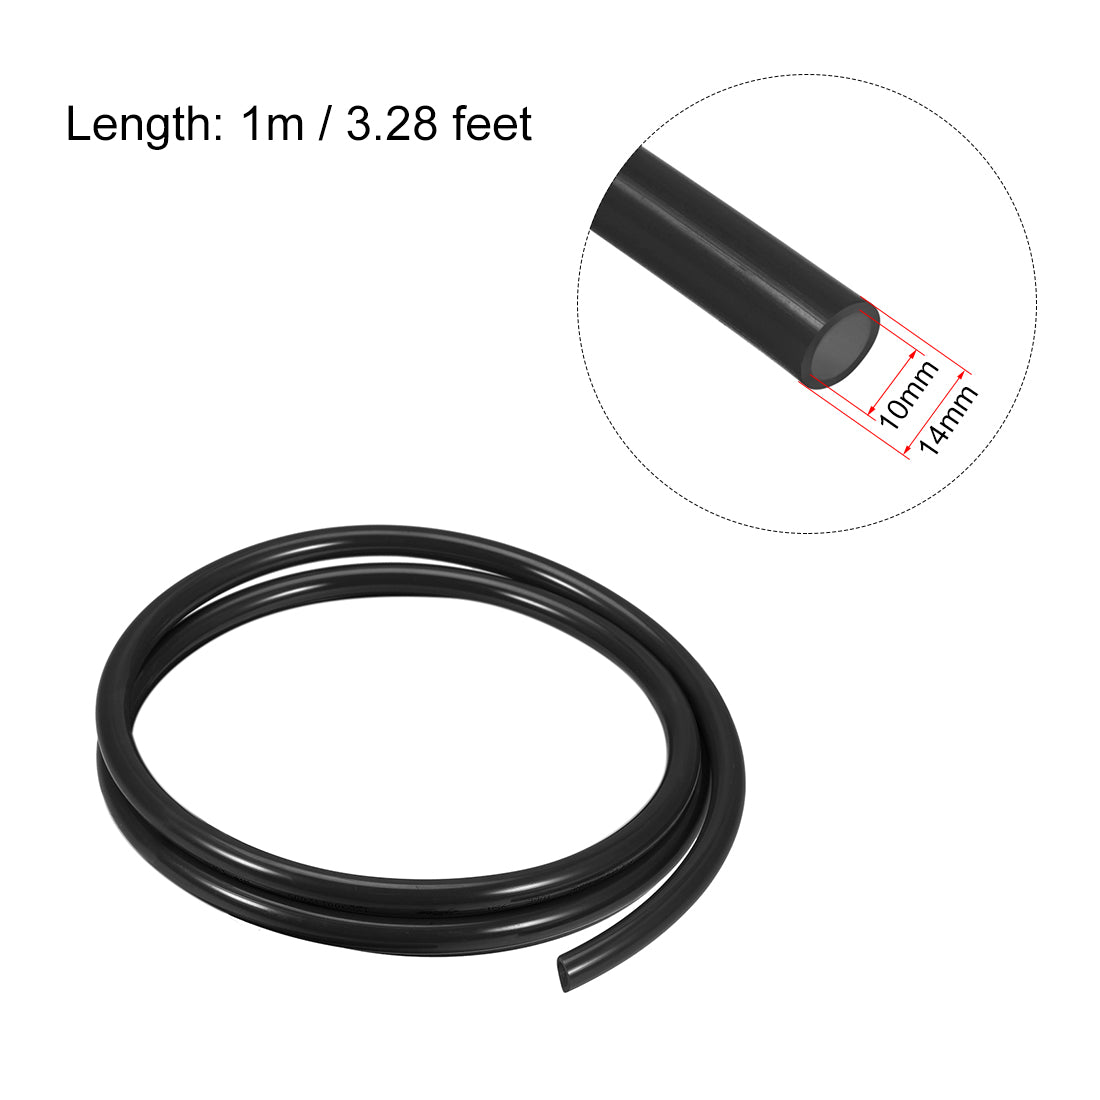 Uxcell Uxcell 14mm OD 10mm ID 1m Long Black PU Air Tubing Pipe Hose for Air Line Tube Fluid Transfer Pneumatic Tubing